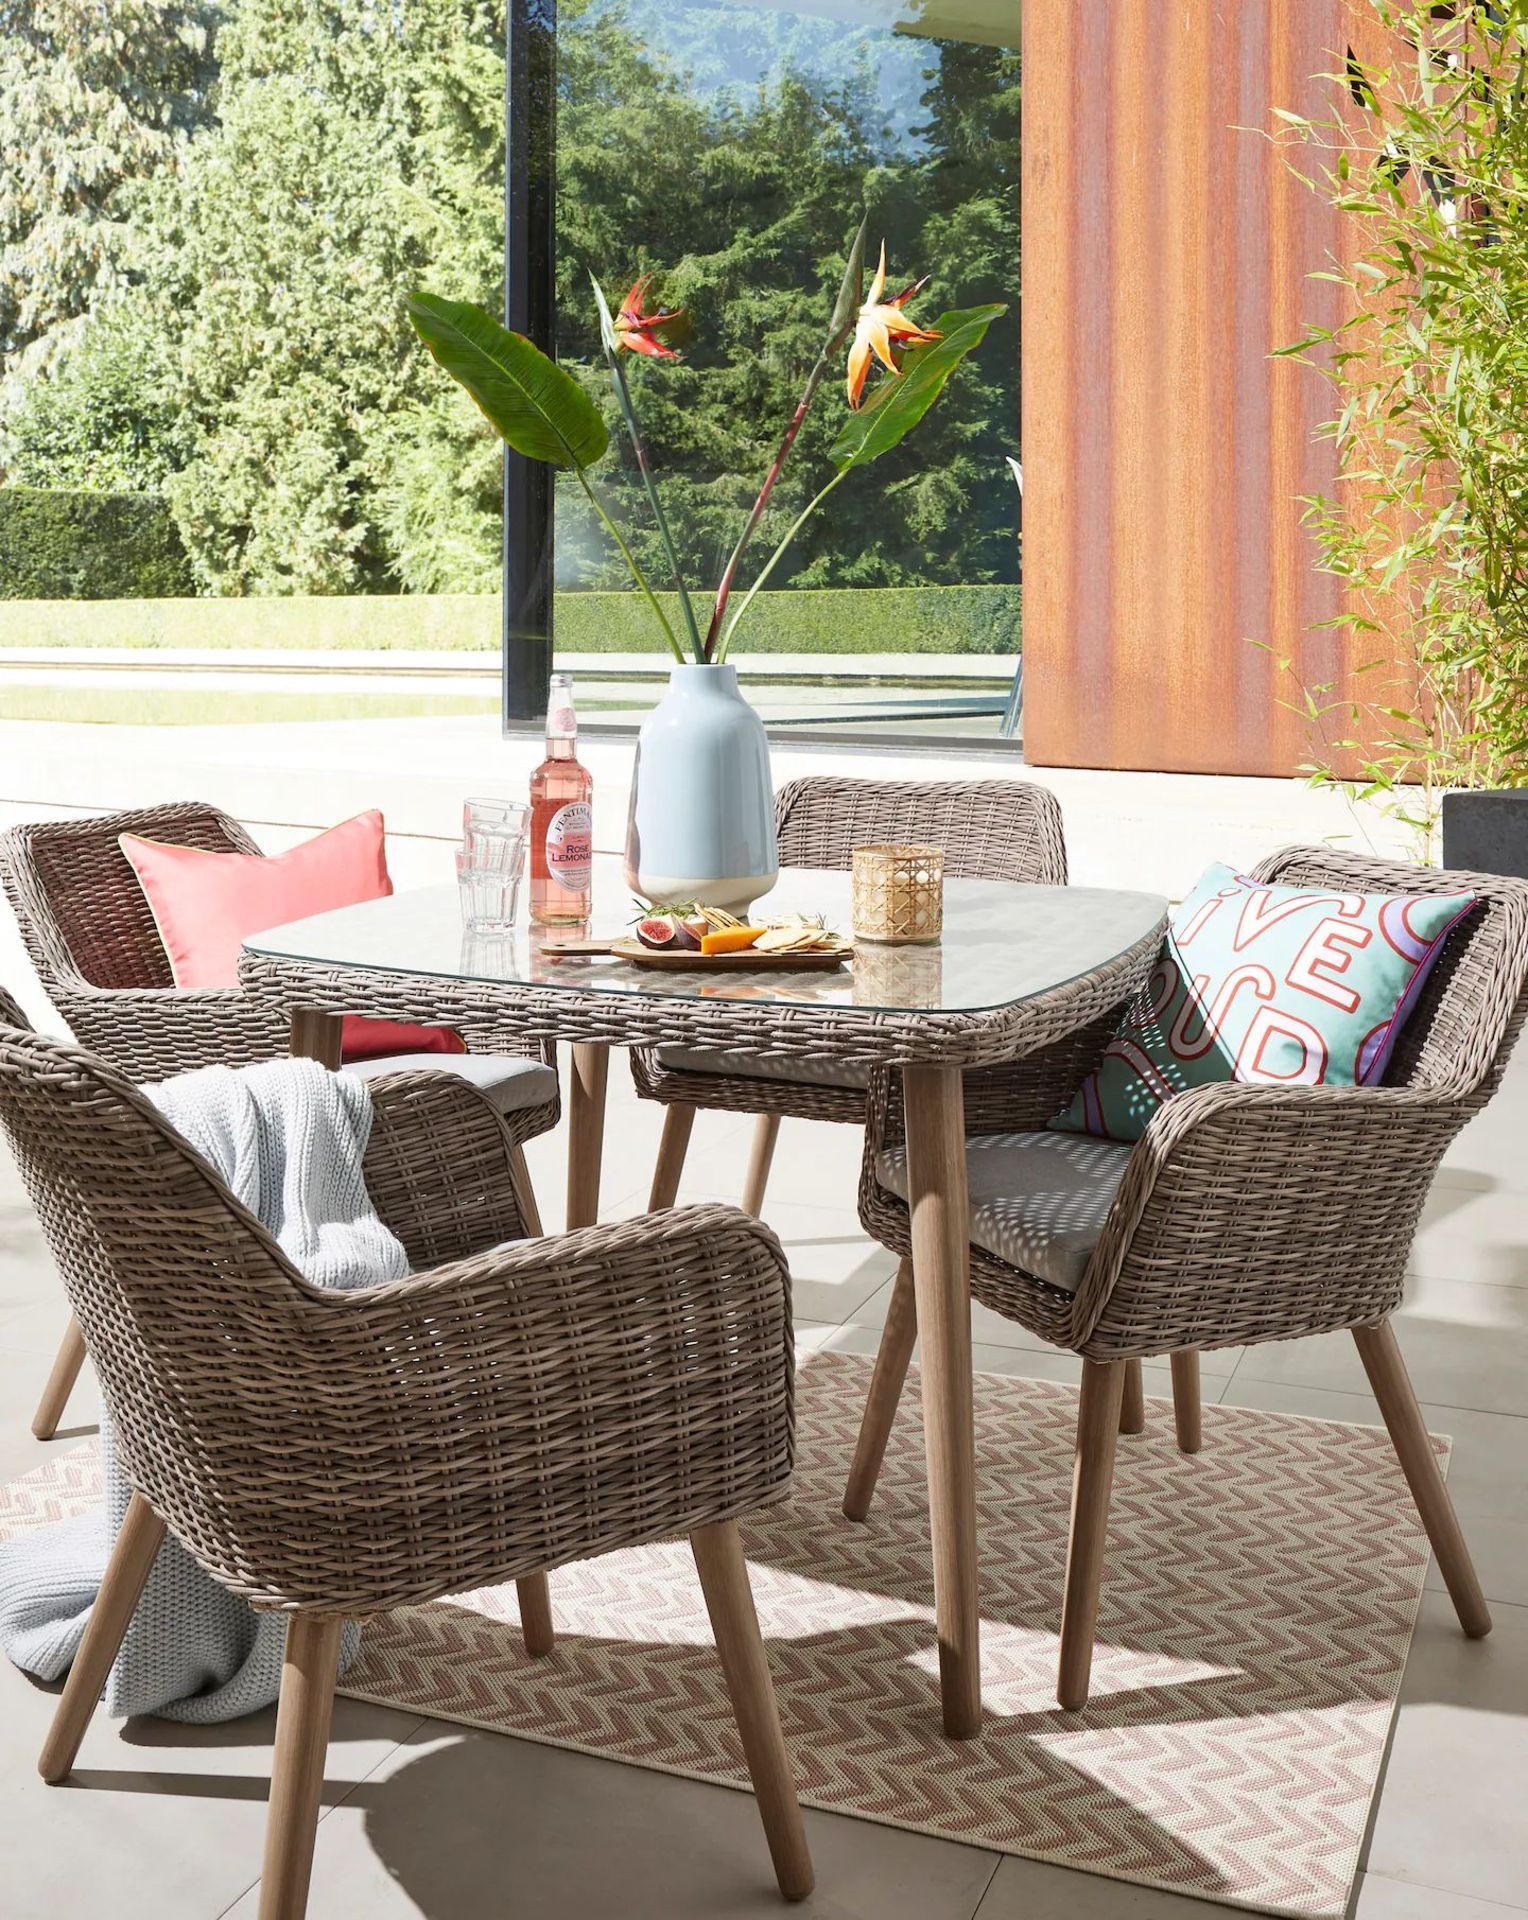 TRADE LOT 3 X BRAND NEW Maldives 4 Seater Dining Set GREY. RRP £879 EACH. This 4 seater dining set